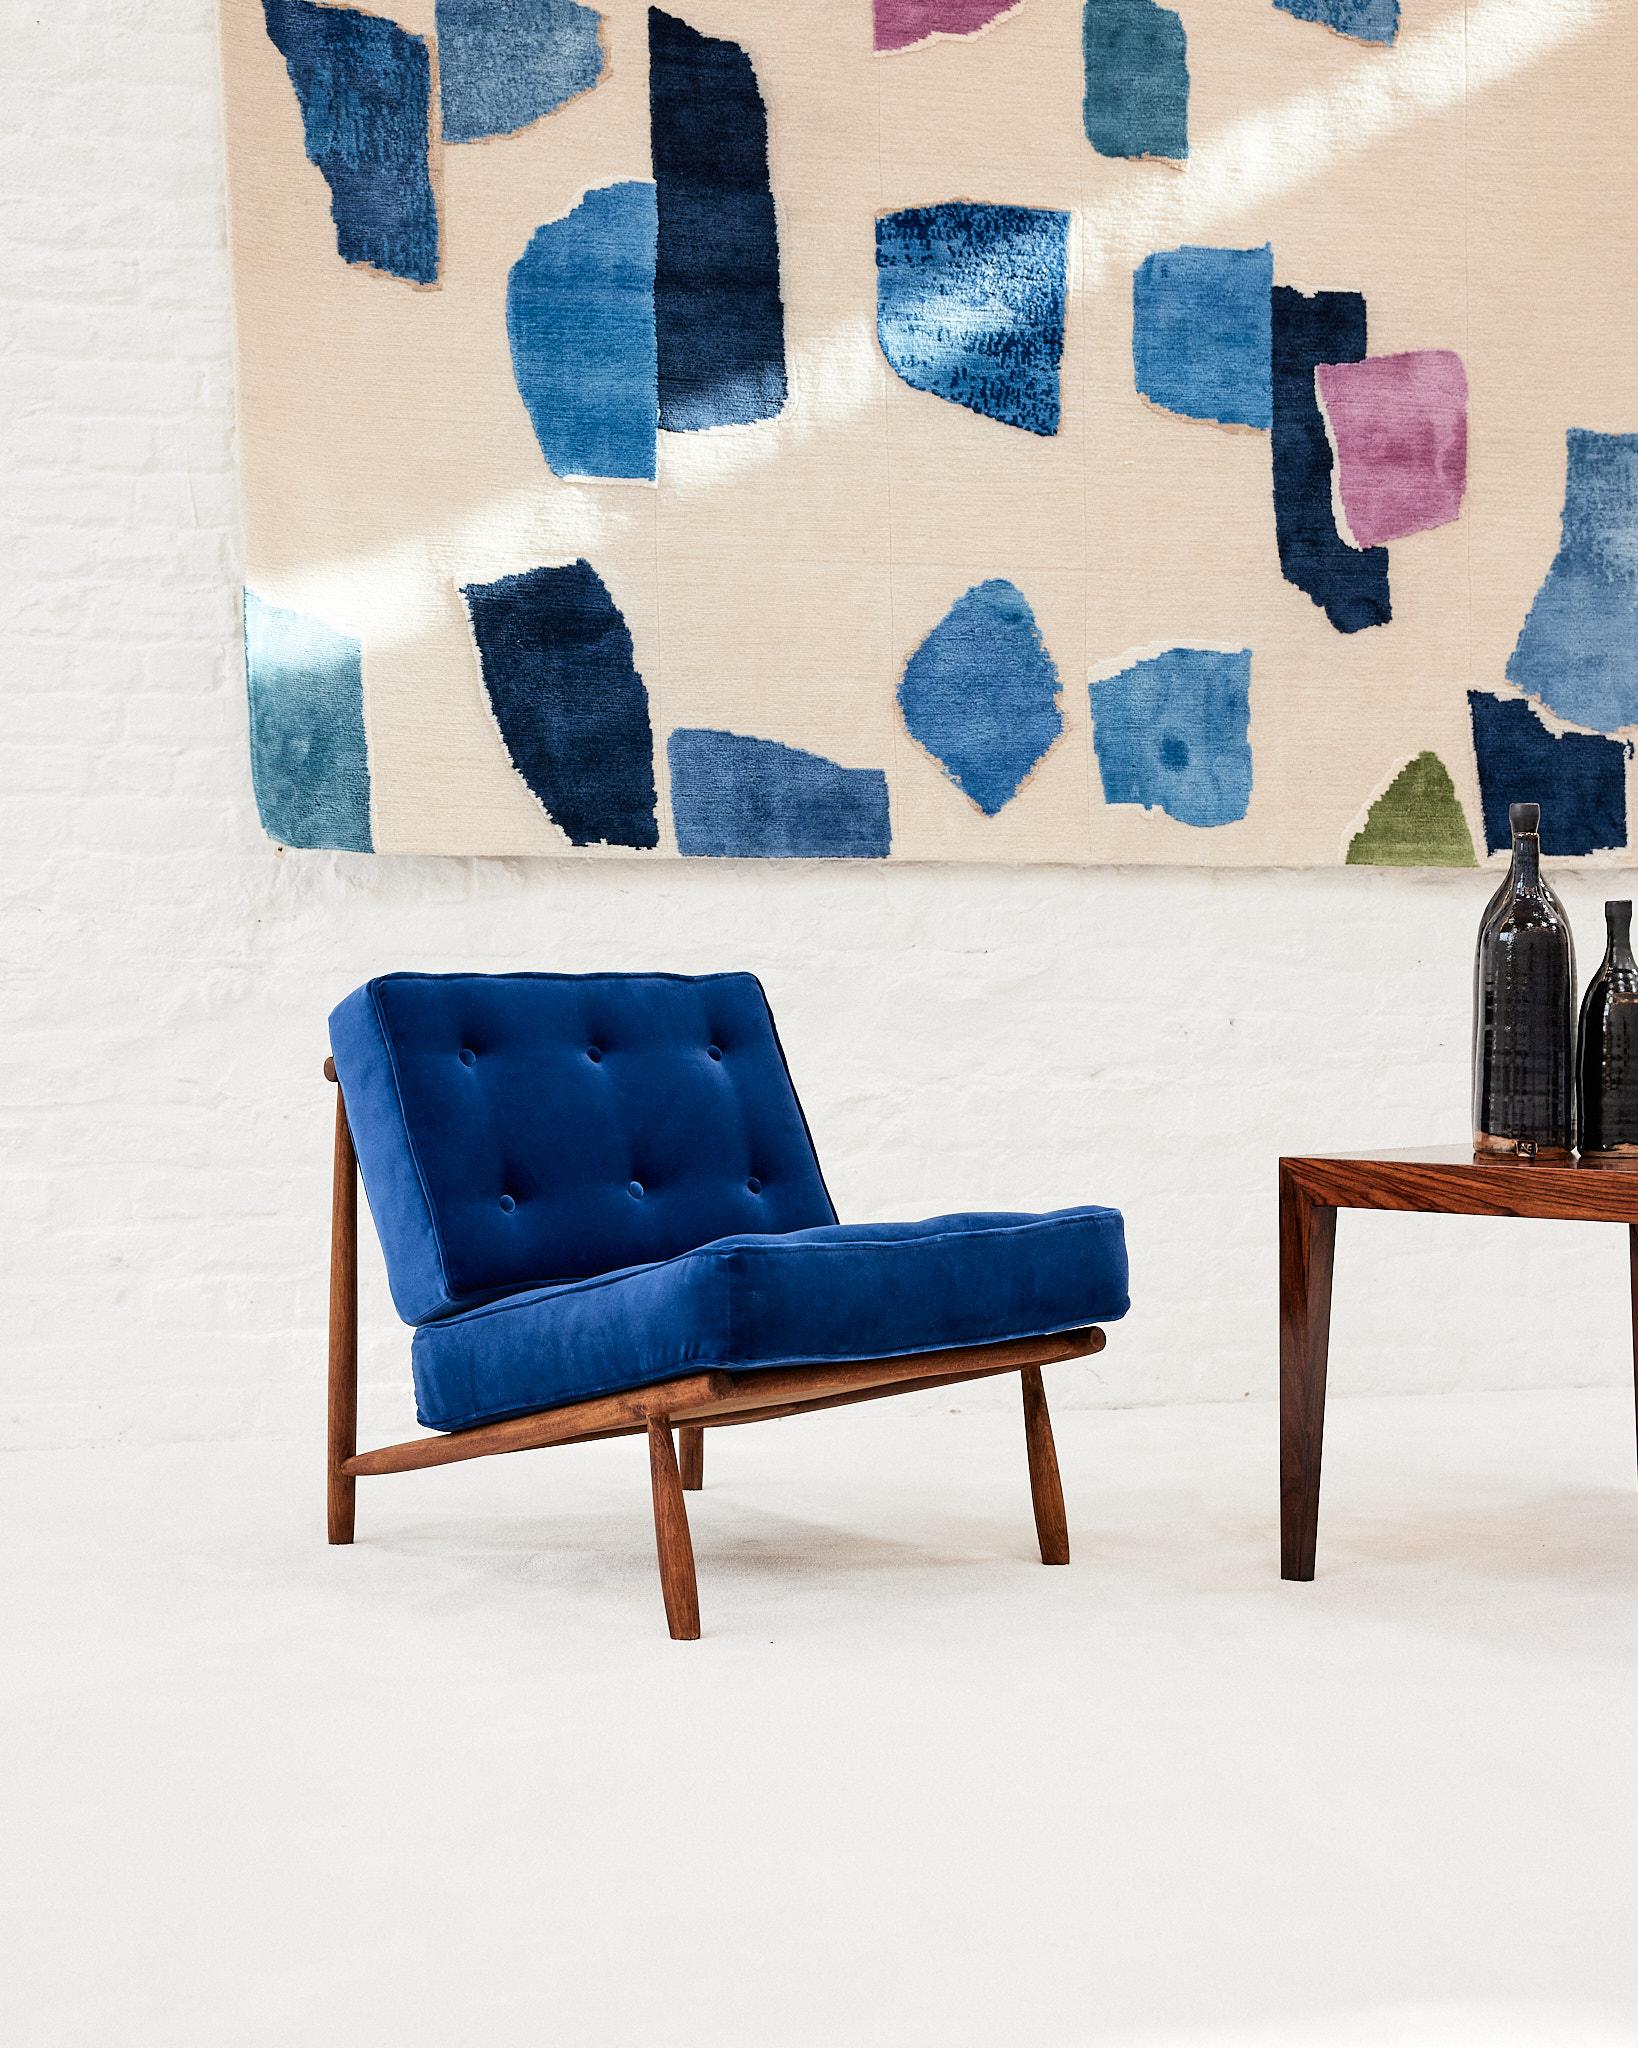 Model “Domus” designed by Alf Svensson. Sweden, 1960s, DUX production. A clean and Minimalist chair, first presented in 1952 by Alf Svensson. The low-profile beechwood frame features newly reupholstered velvet cushions in a speckled electric blue